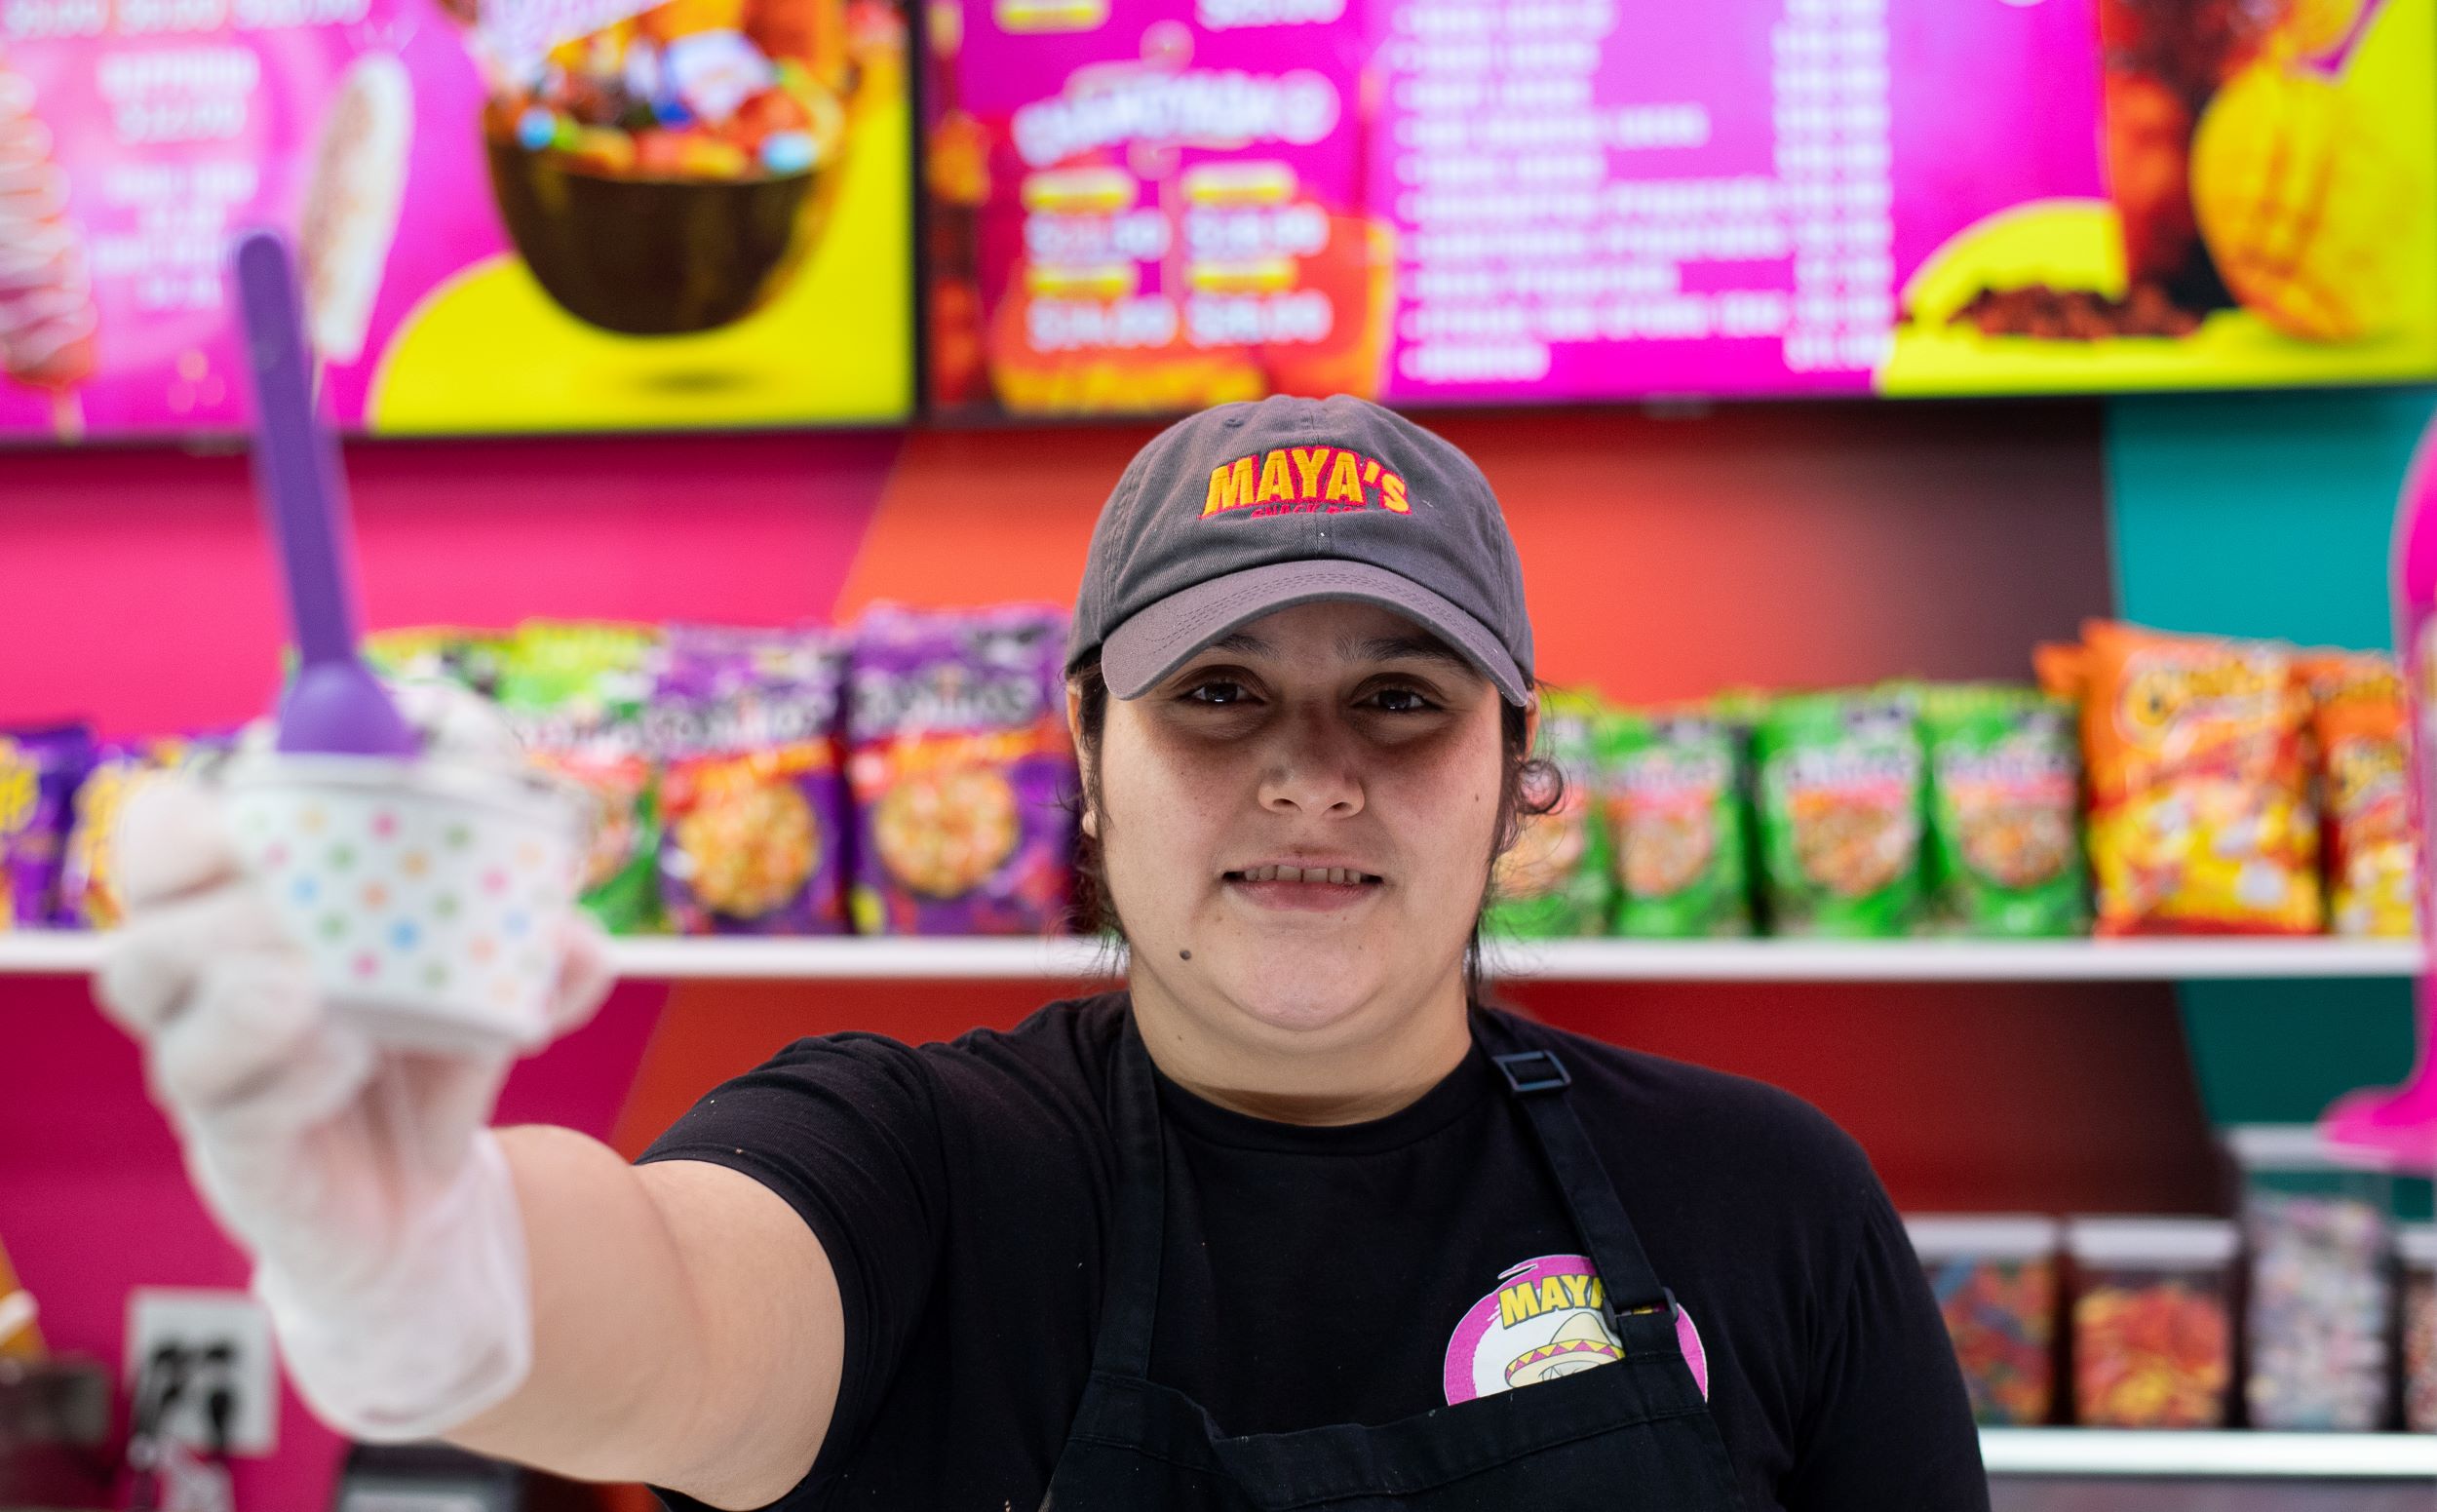 A woman in a black apron and cap labeled "maya's" holds out a cup of frozen yogurt towards the camera, standing at a brightly colored food counter.